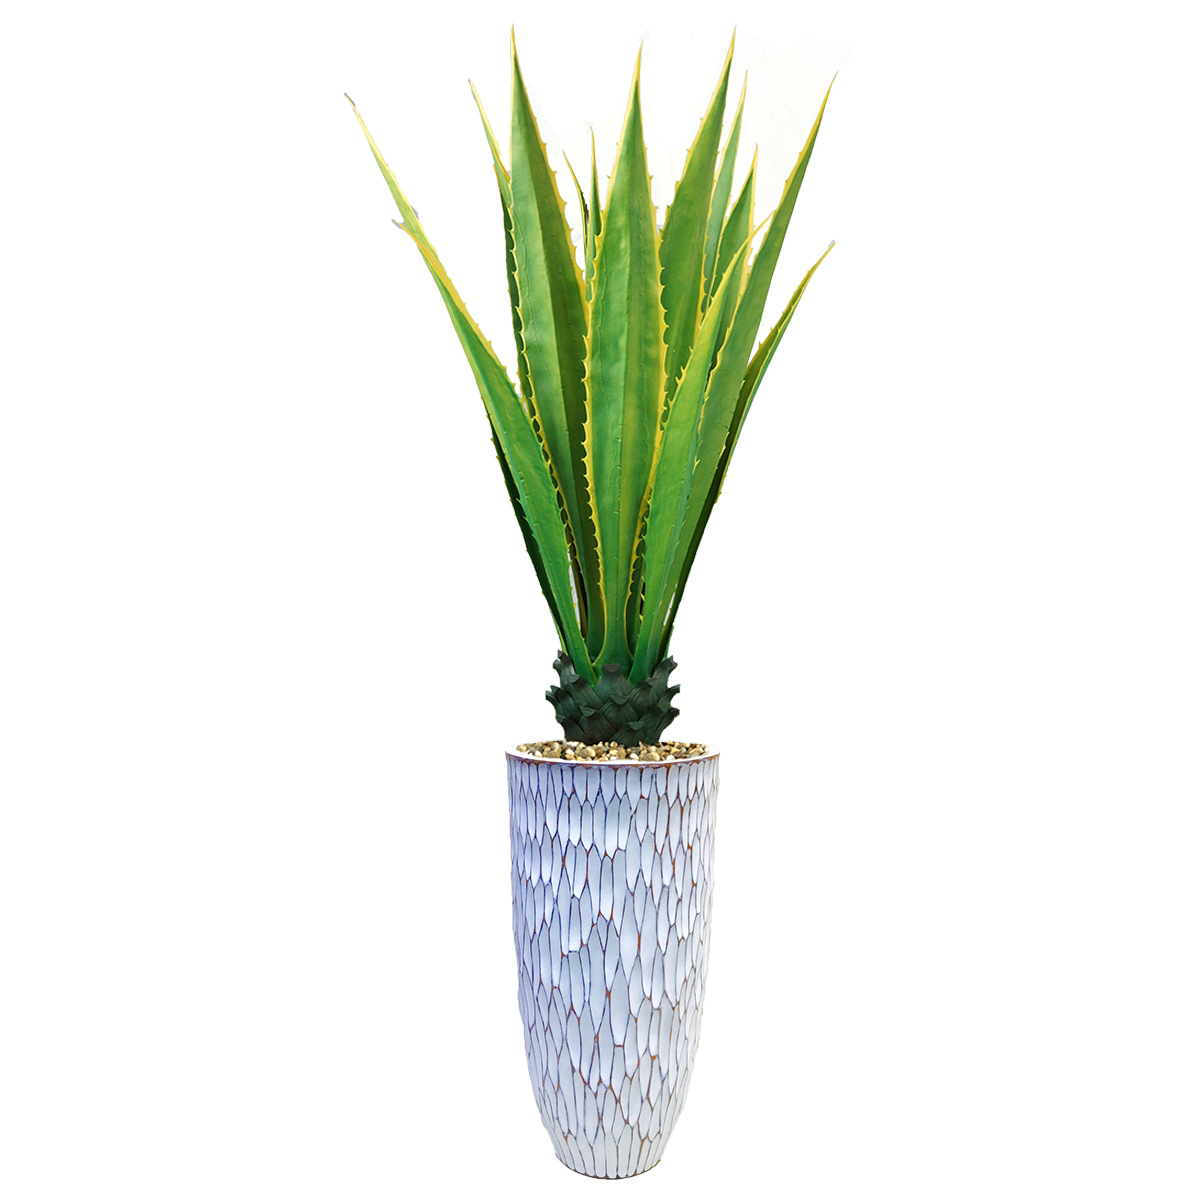 Vhx147219 67.5 In. Indoor & Outdoor Agave Plant In Resin Planter